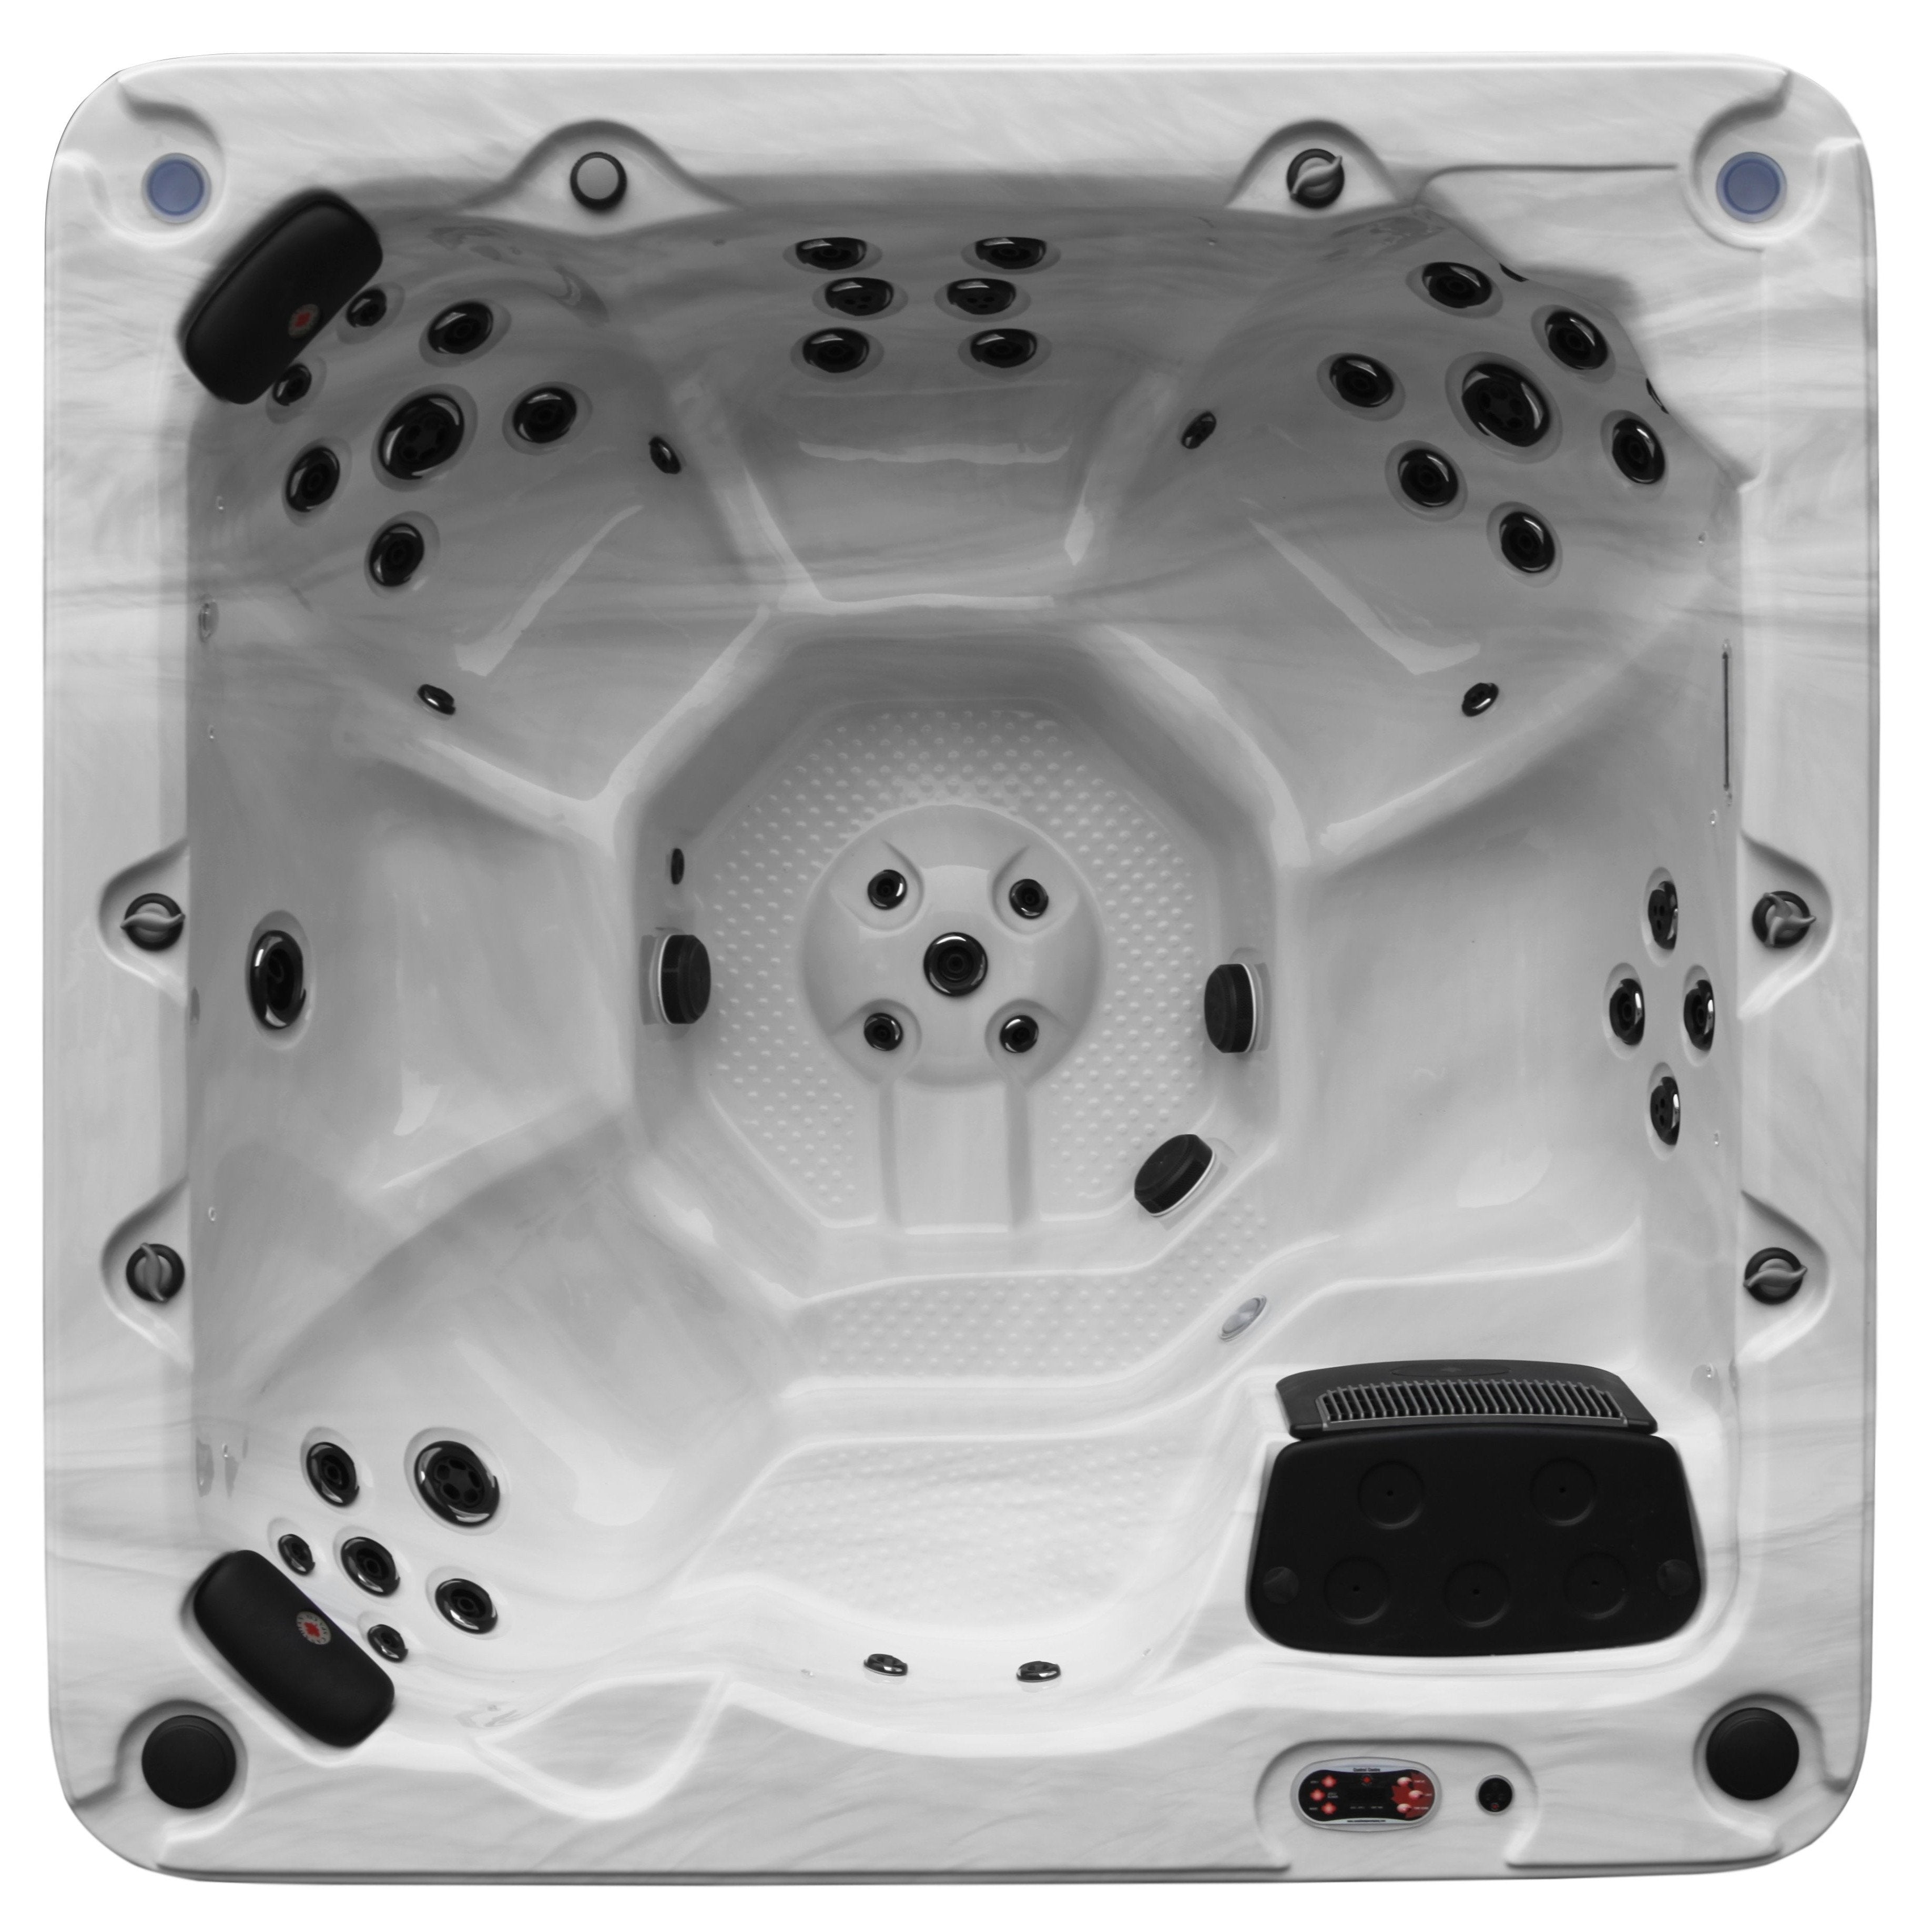 Victoria 7 Person Hot Tub Jacuzzi W 46 Jets Kh 10110 Buy Online Find Your Bath